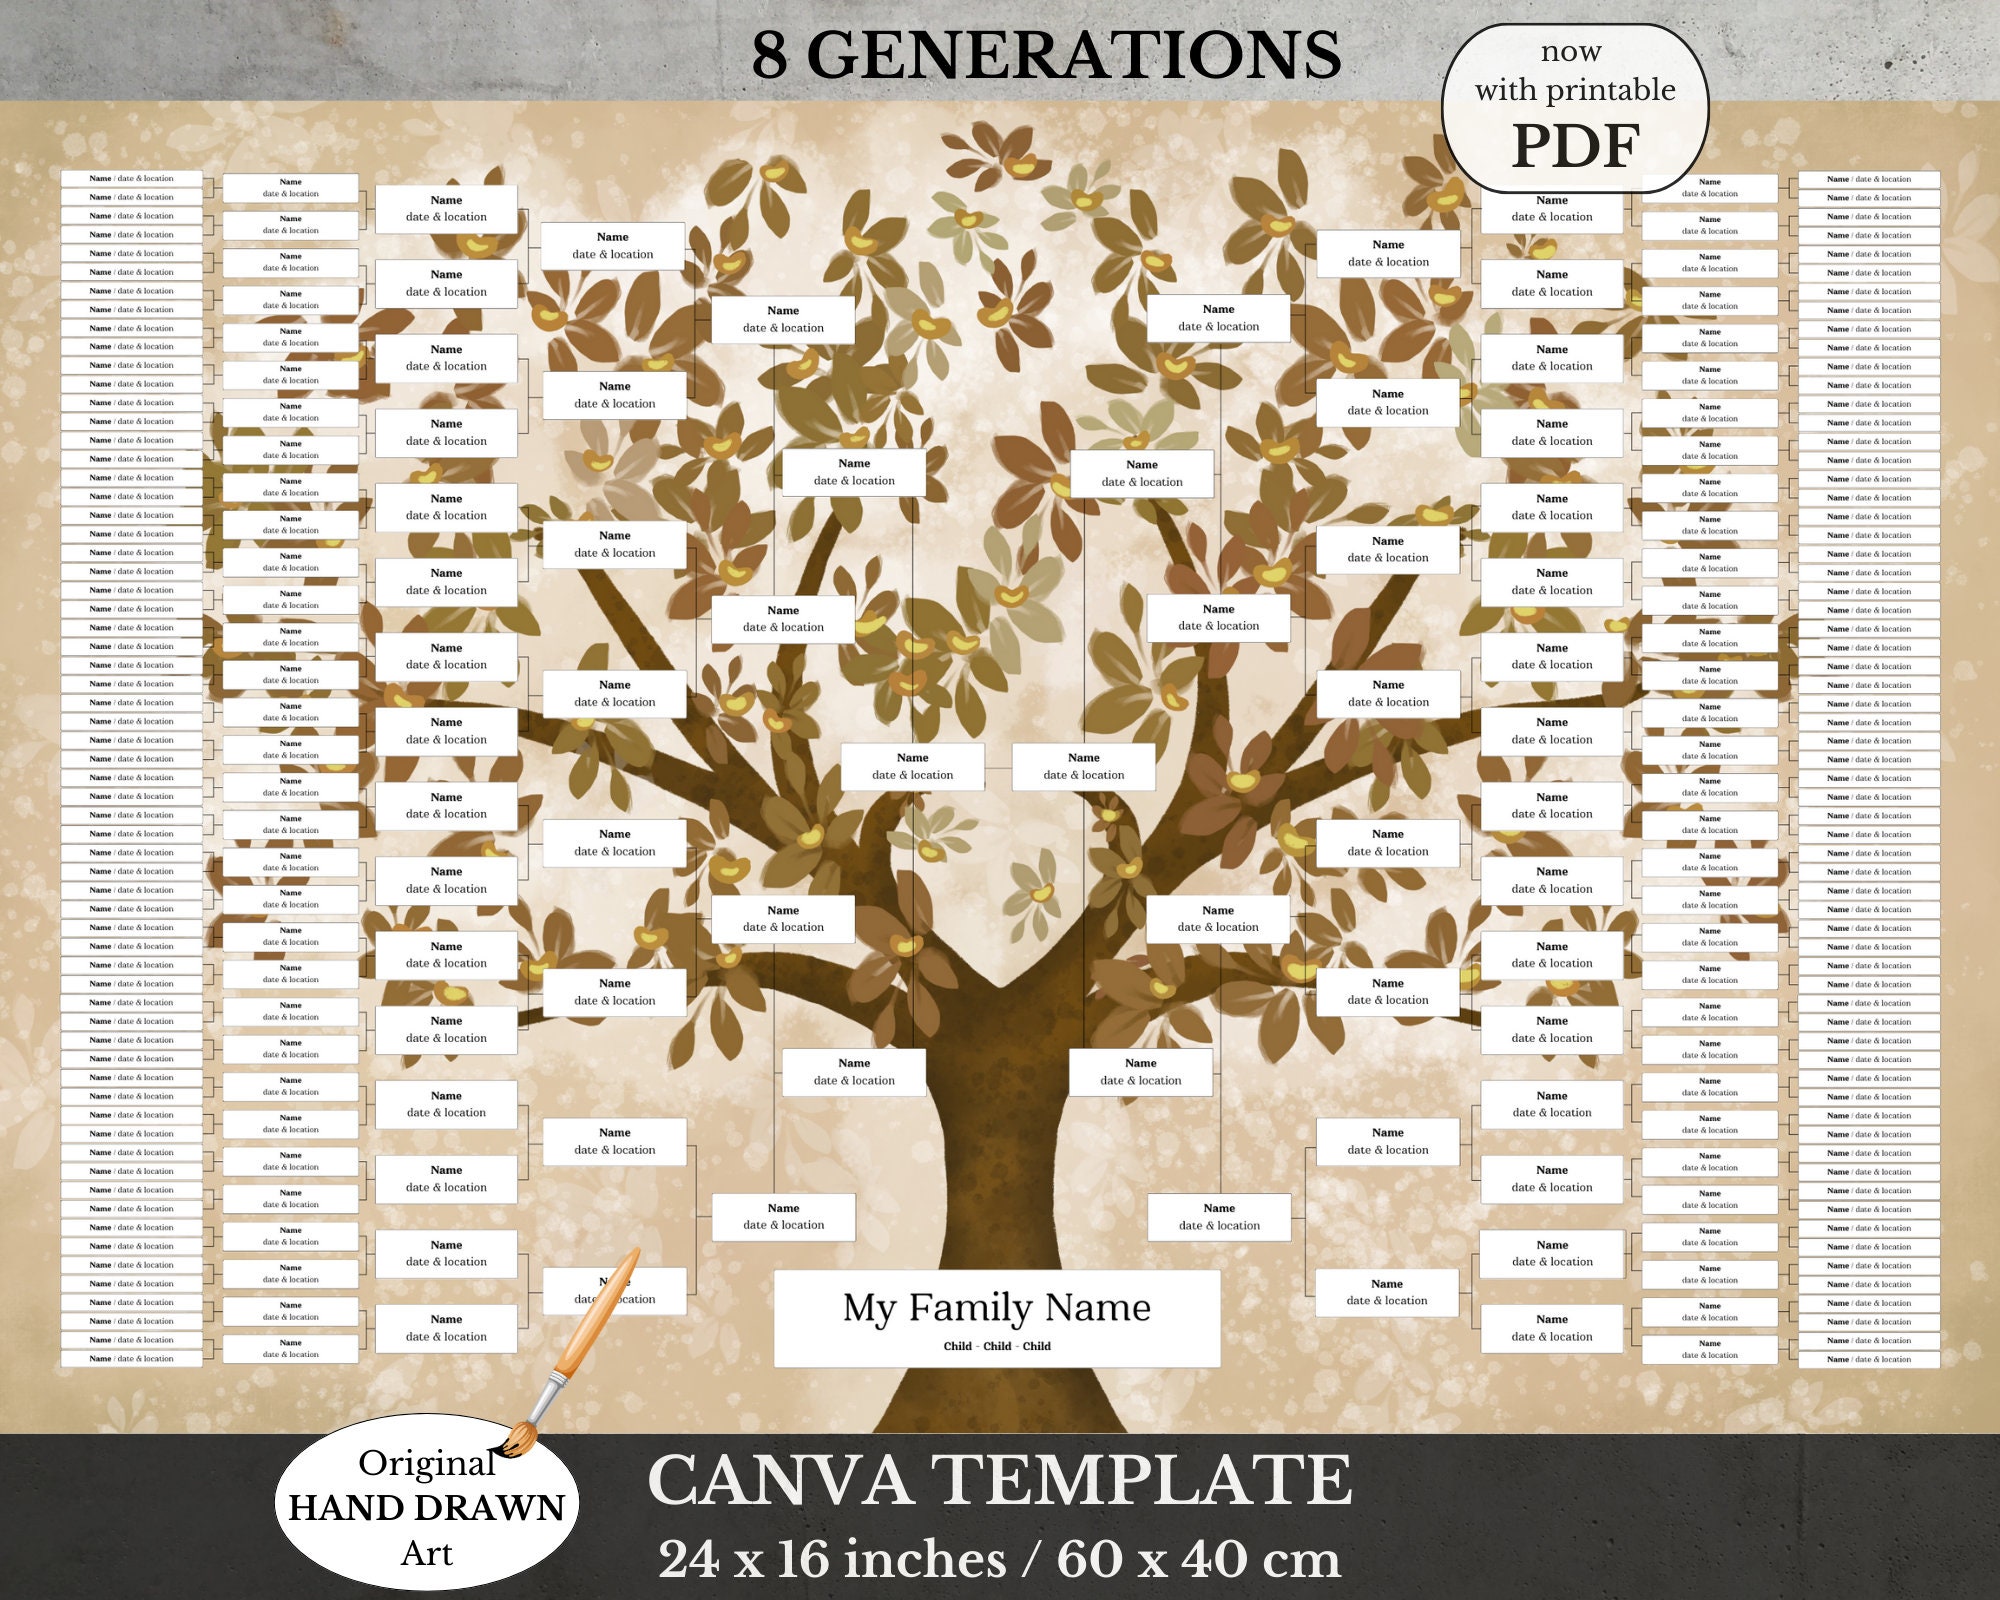 Family Tree Chart To Fill In Fillable Generations Genealogy Chart And Forms  Photo Canvas Genealogy - AliExpress